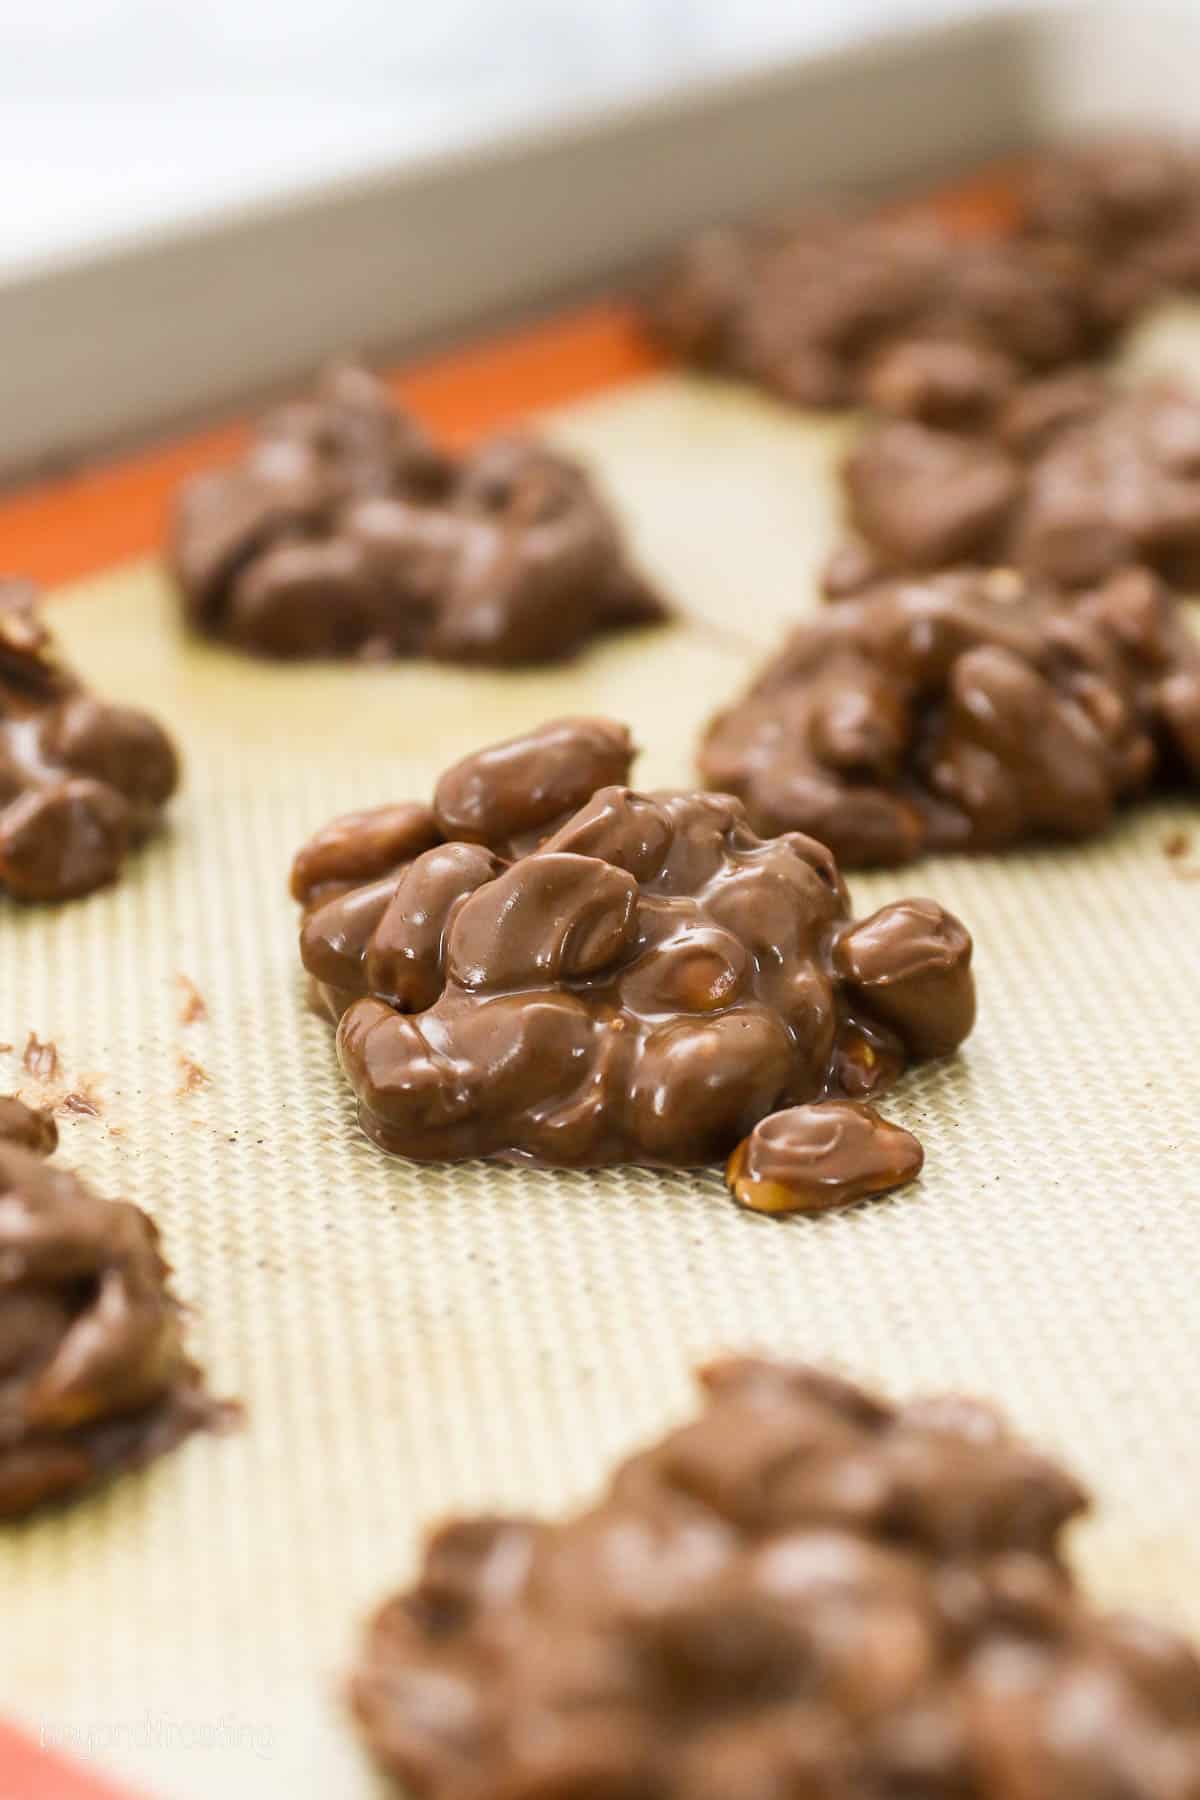 scoops of melted chocolate and peanuts dropped onto a lined baking sheet